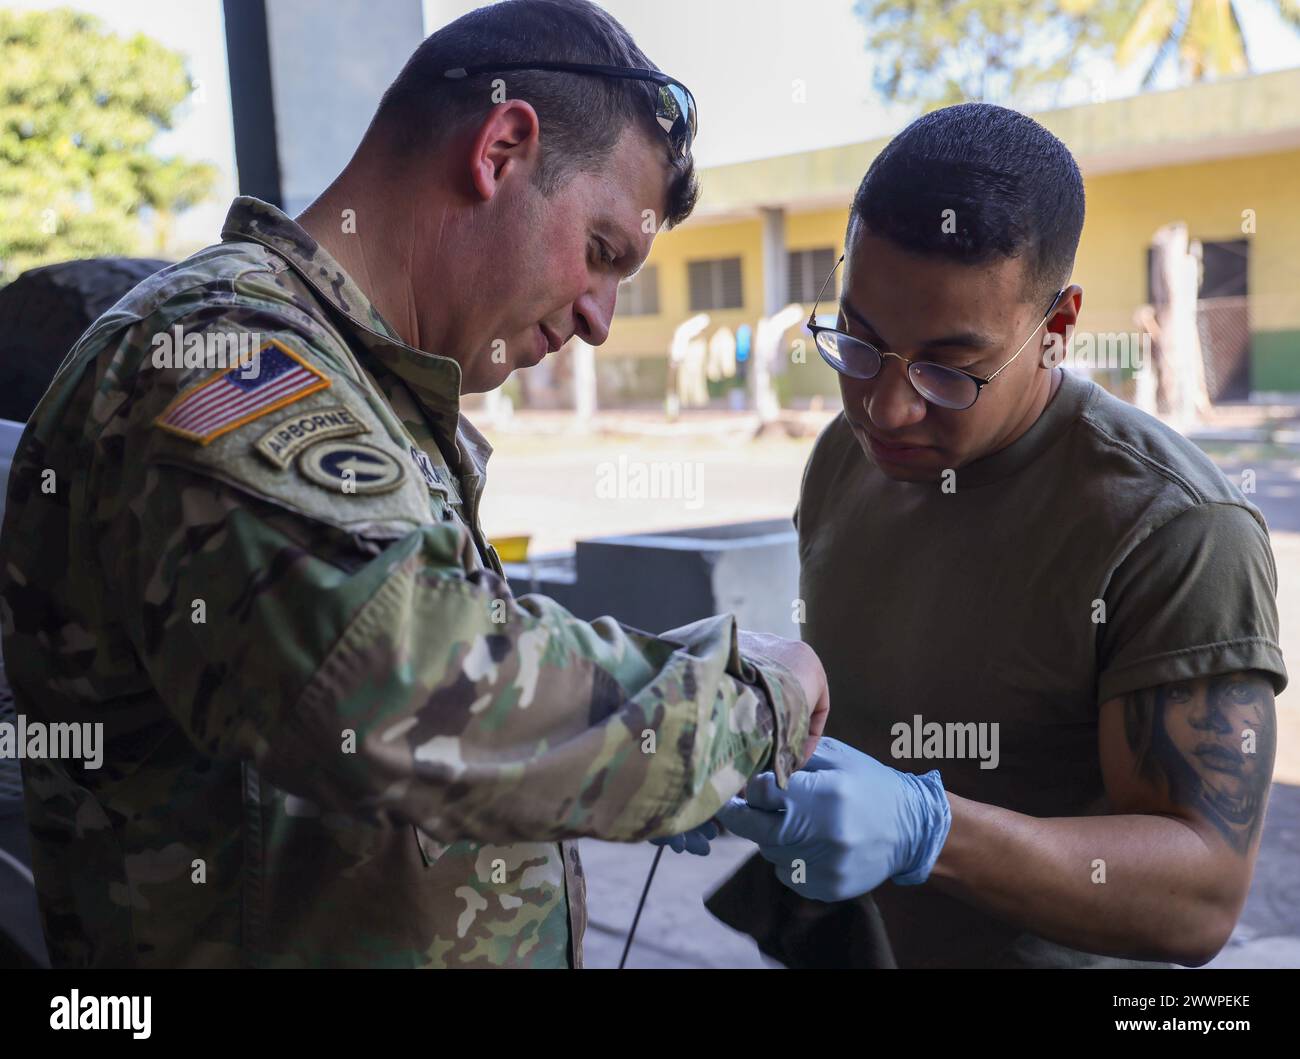 (From left) Warrant Officer Adam Czekalski, an automotive maintenance warrant officer with Joint Force Headquarters, New Hampshire National Guard, explains the levels on the transmission fluid dipstick to Spc. Daniel Bedoya, a mission translator and a wheeled vehicle mechanic with Alpha Company, 1st Battalion, 169th Aviation Regiment (MEDEVAC), 54th Troop Command, New Hampshire Army National Guard, during a troubleshooting exercise with the Fuerza Armada de El Salvador Cavalry mechanics at the Cavalry Regiment base in Sitio del Nino, El Salvador on February 16, 2024.  Army National Guard Stock Photo